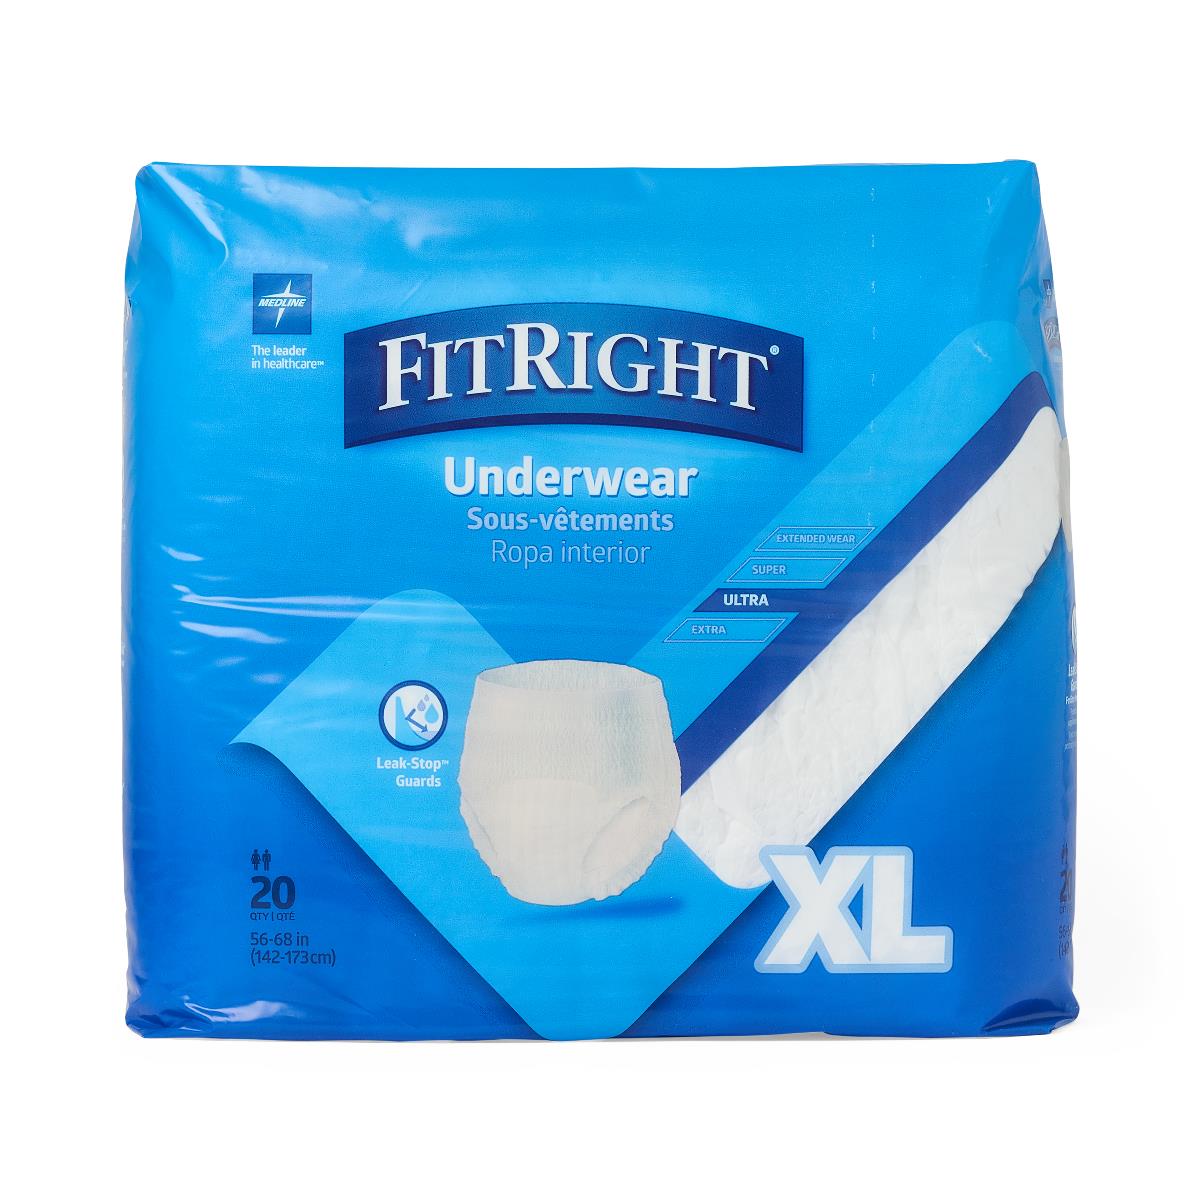 FitRight Ultra Adult Incontinence Underwear